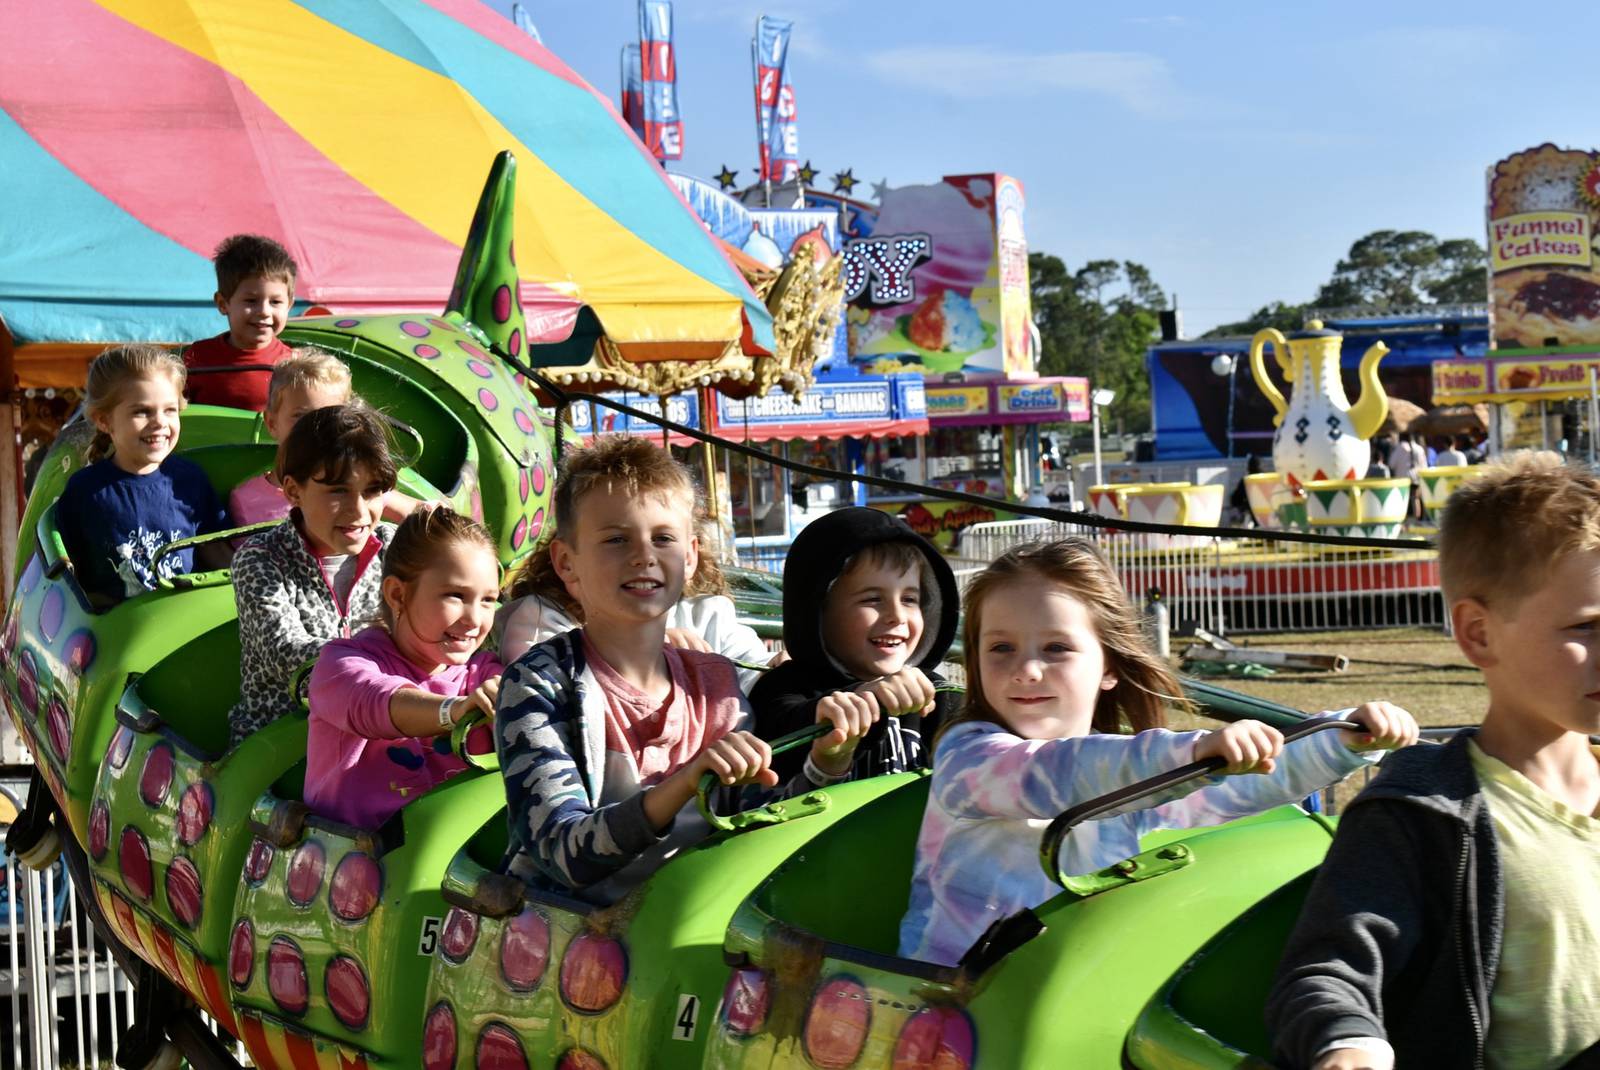 Engage in sensorysensitive activities at Seminole County Fair on